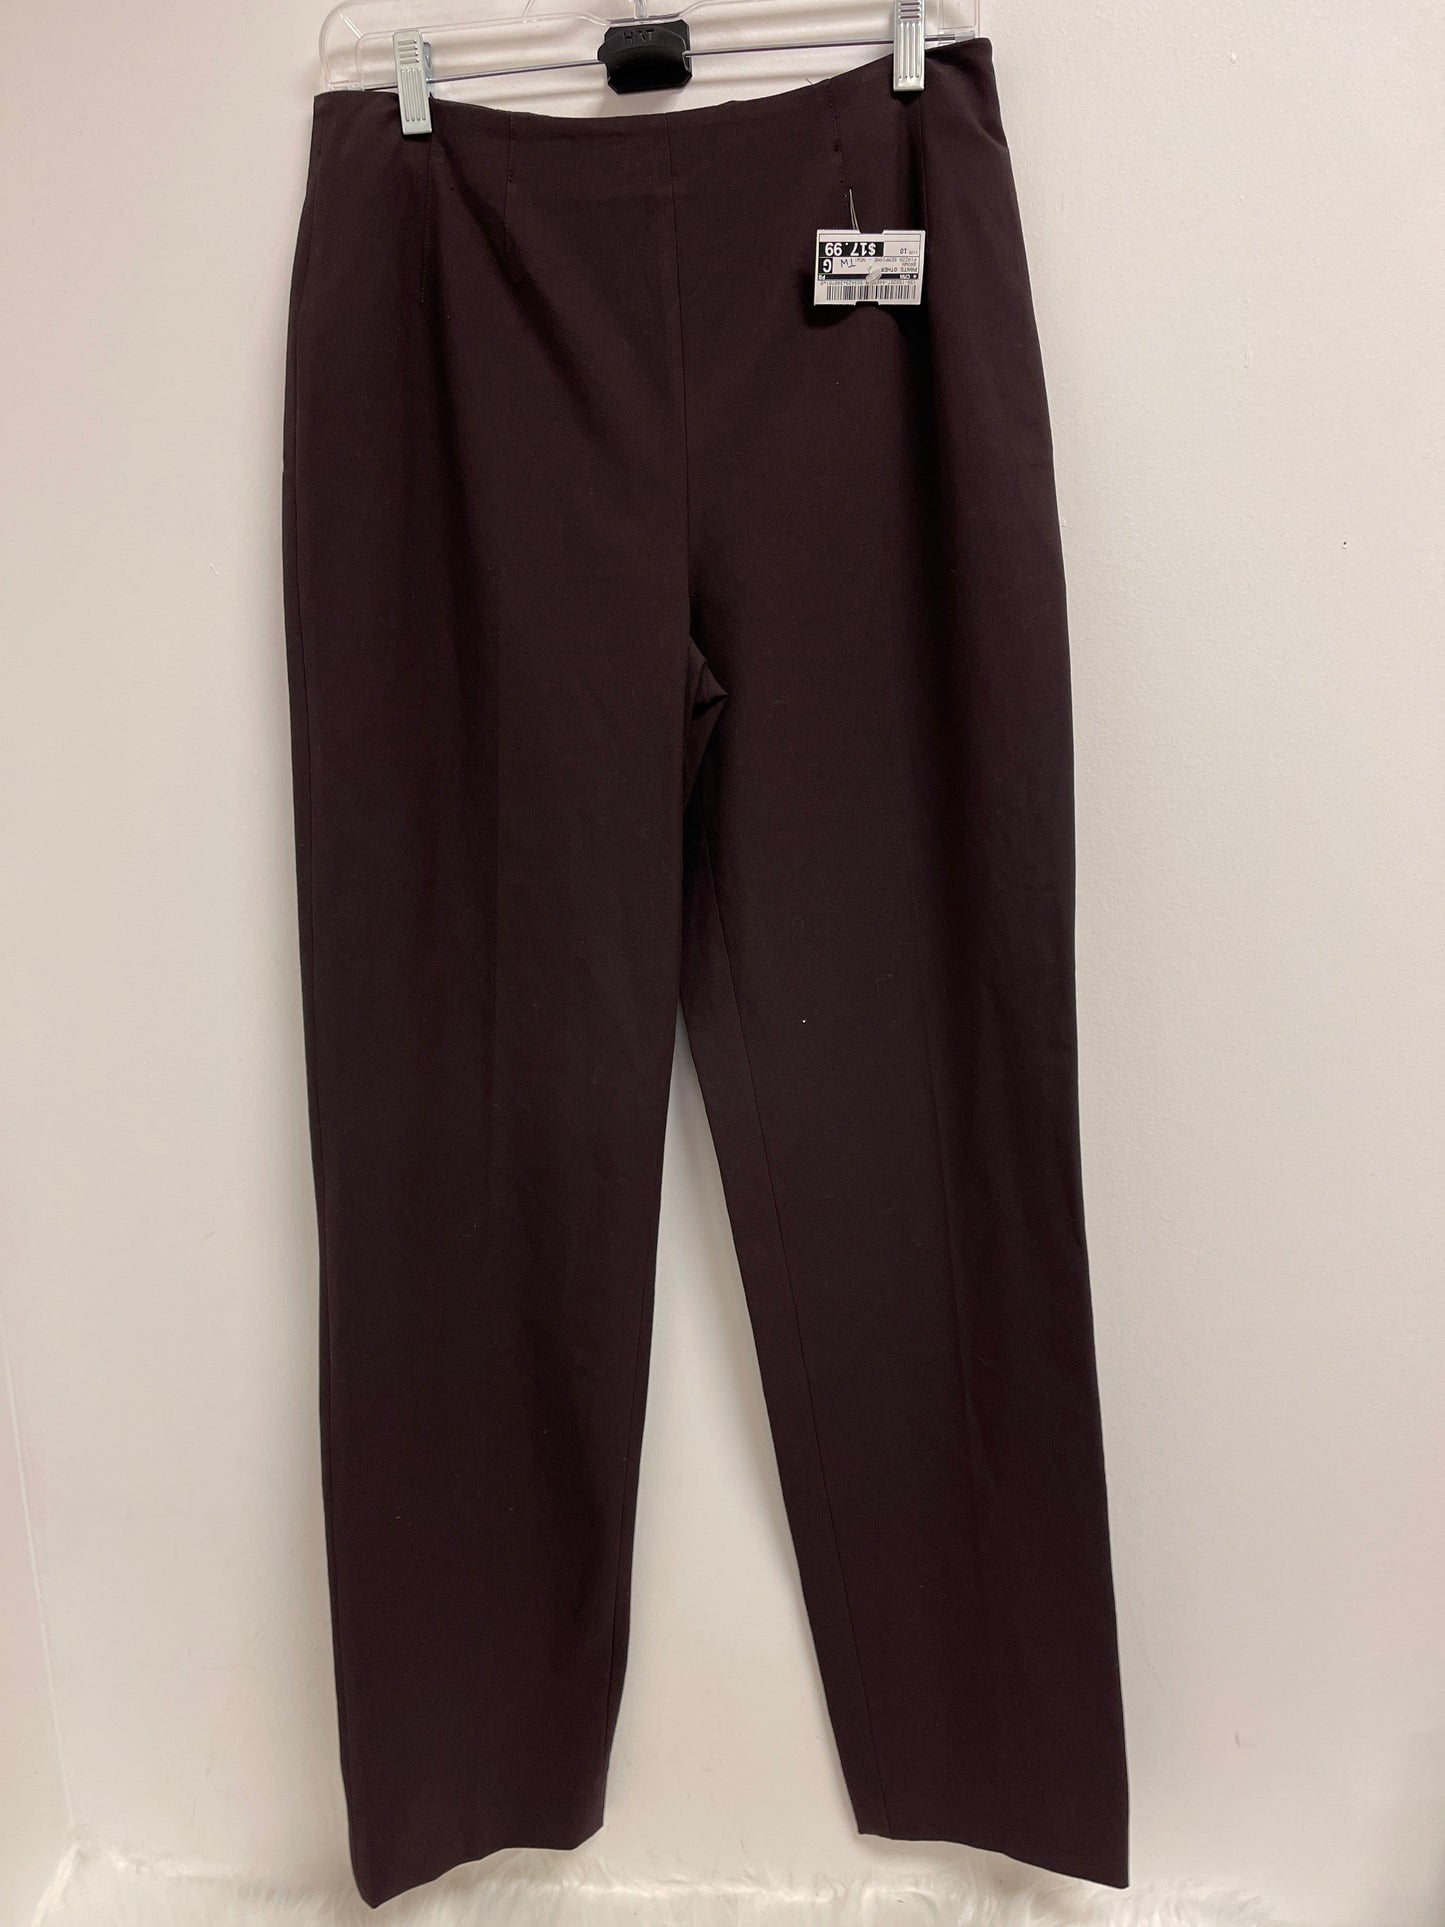 Brown Pants Other Cma, Size 10